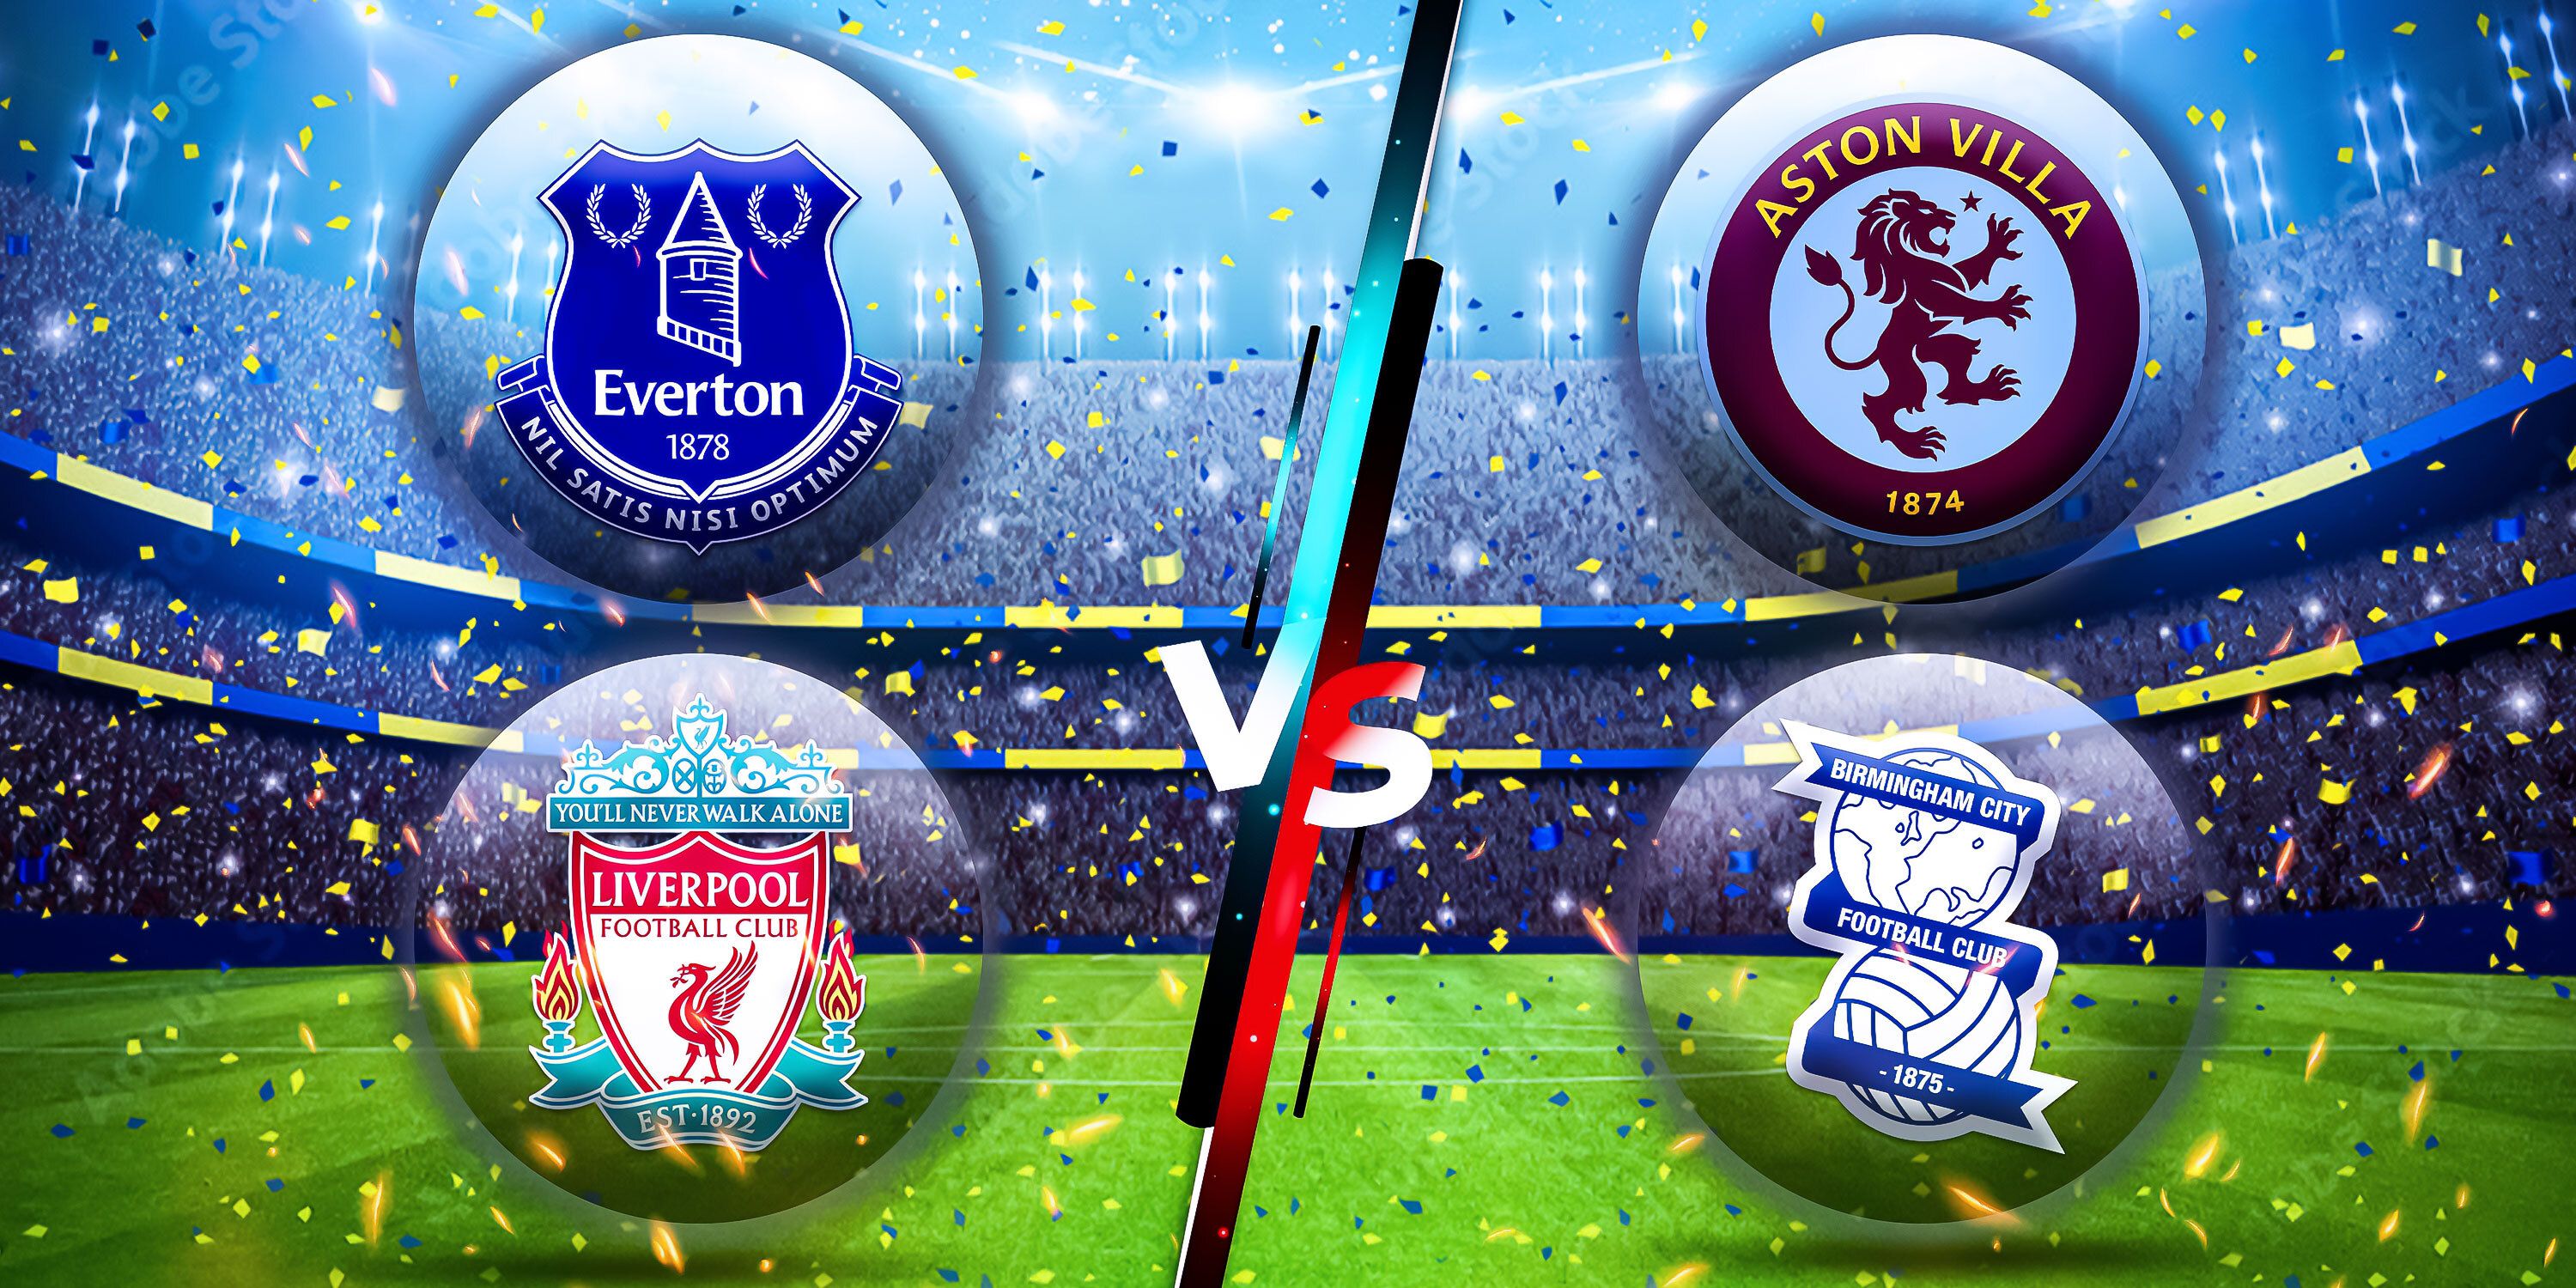 Everton, Liverpool, Aston Villa and Birmingham badges in front of a football background